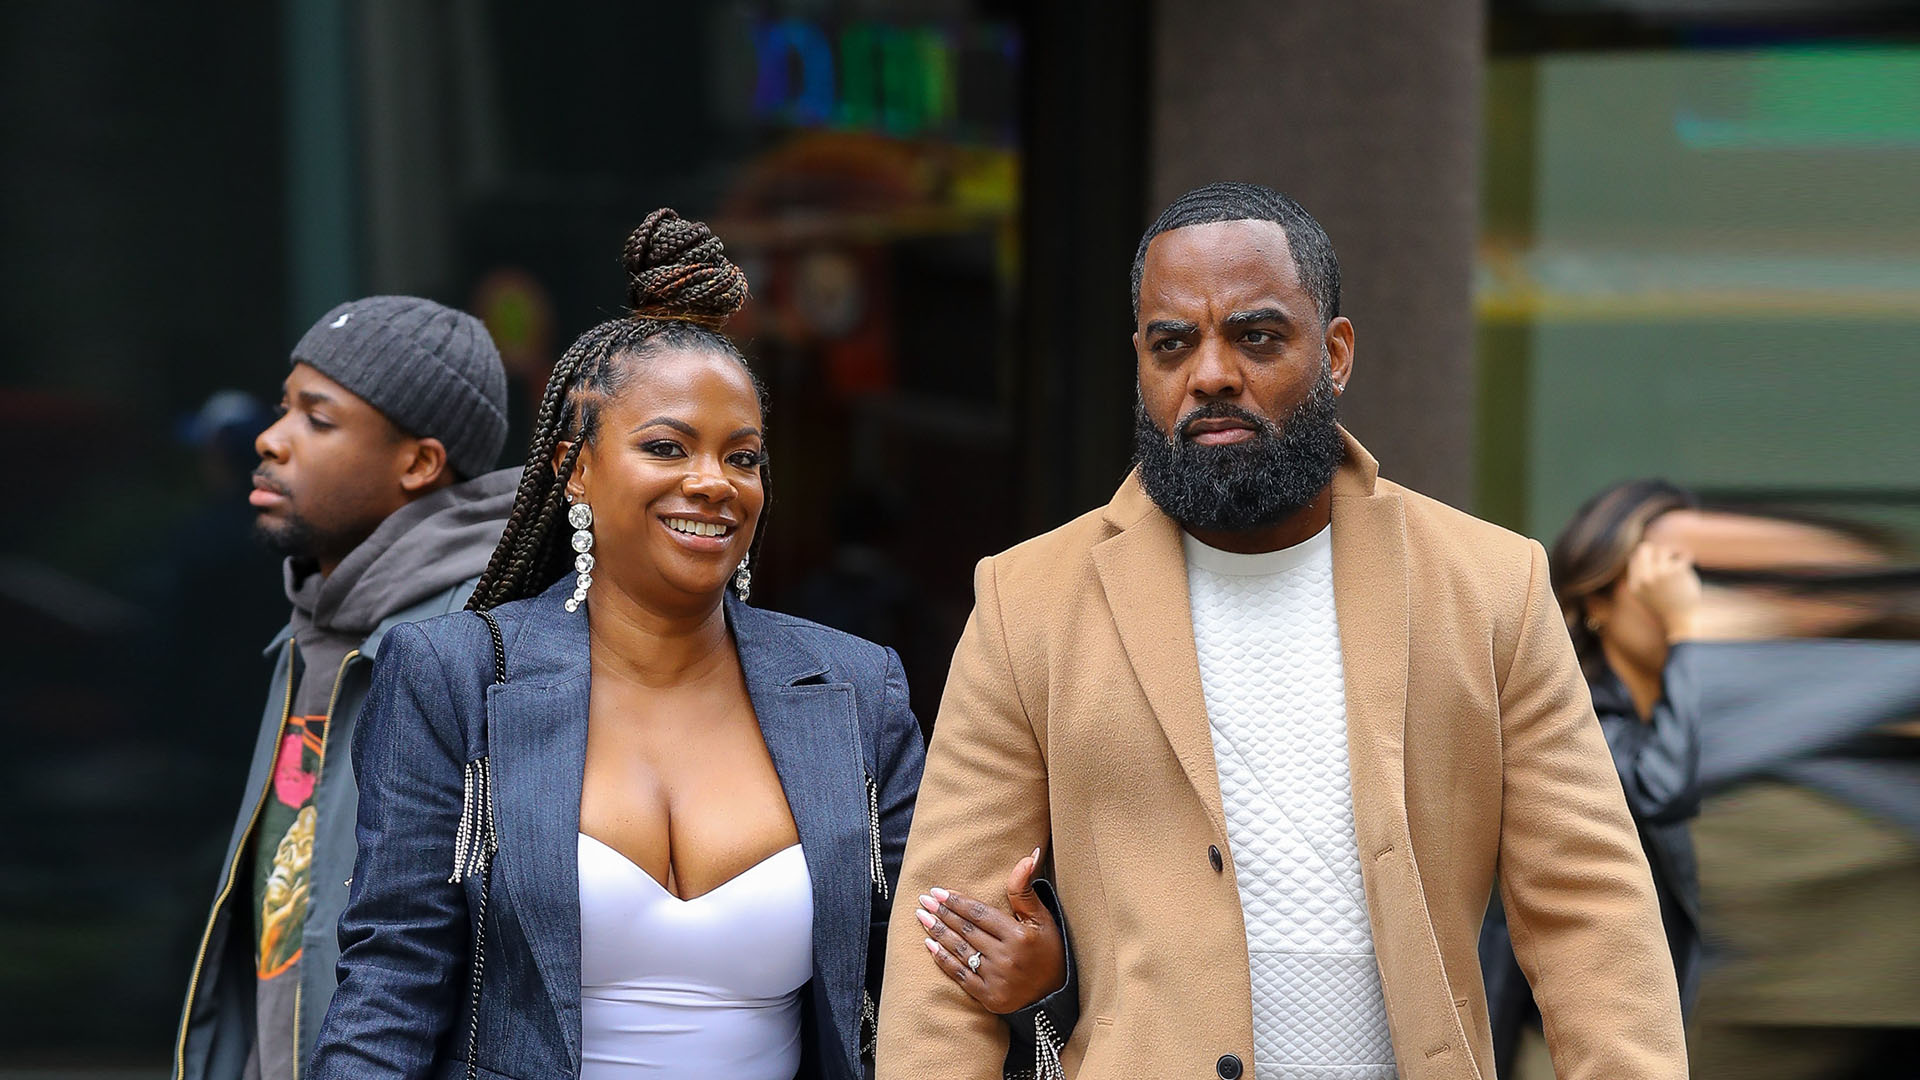 RHOA star Kandi Burruss and husband Todd seen in rare NYC outing as they promote new career move after quitting show [Video]